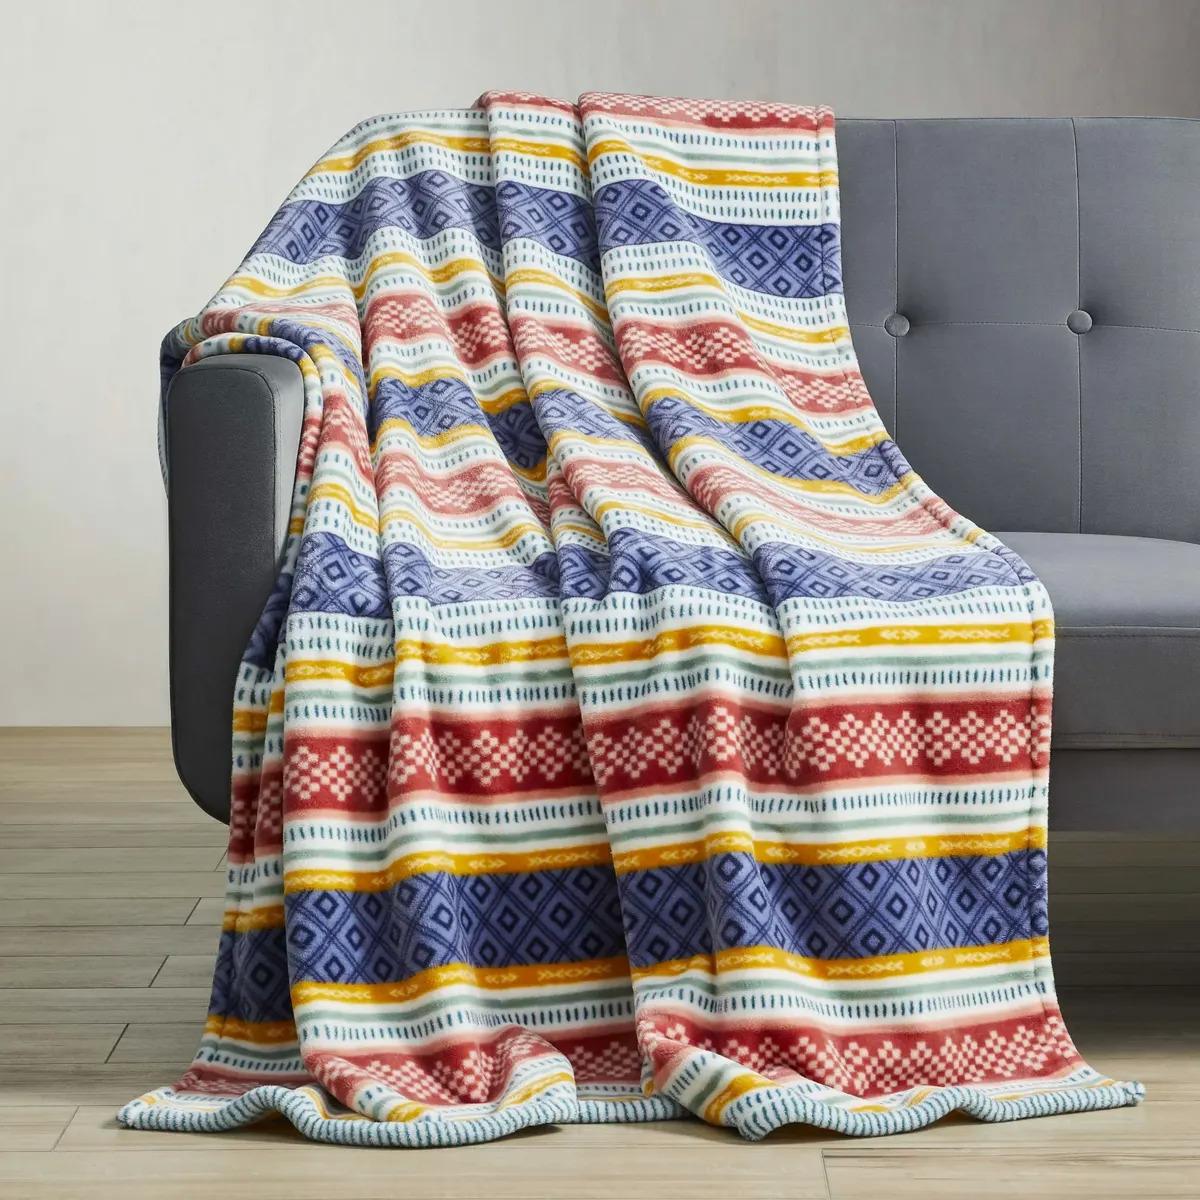 Better Homes and Gardens Oversized Throw Striped for $5.84